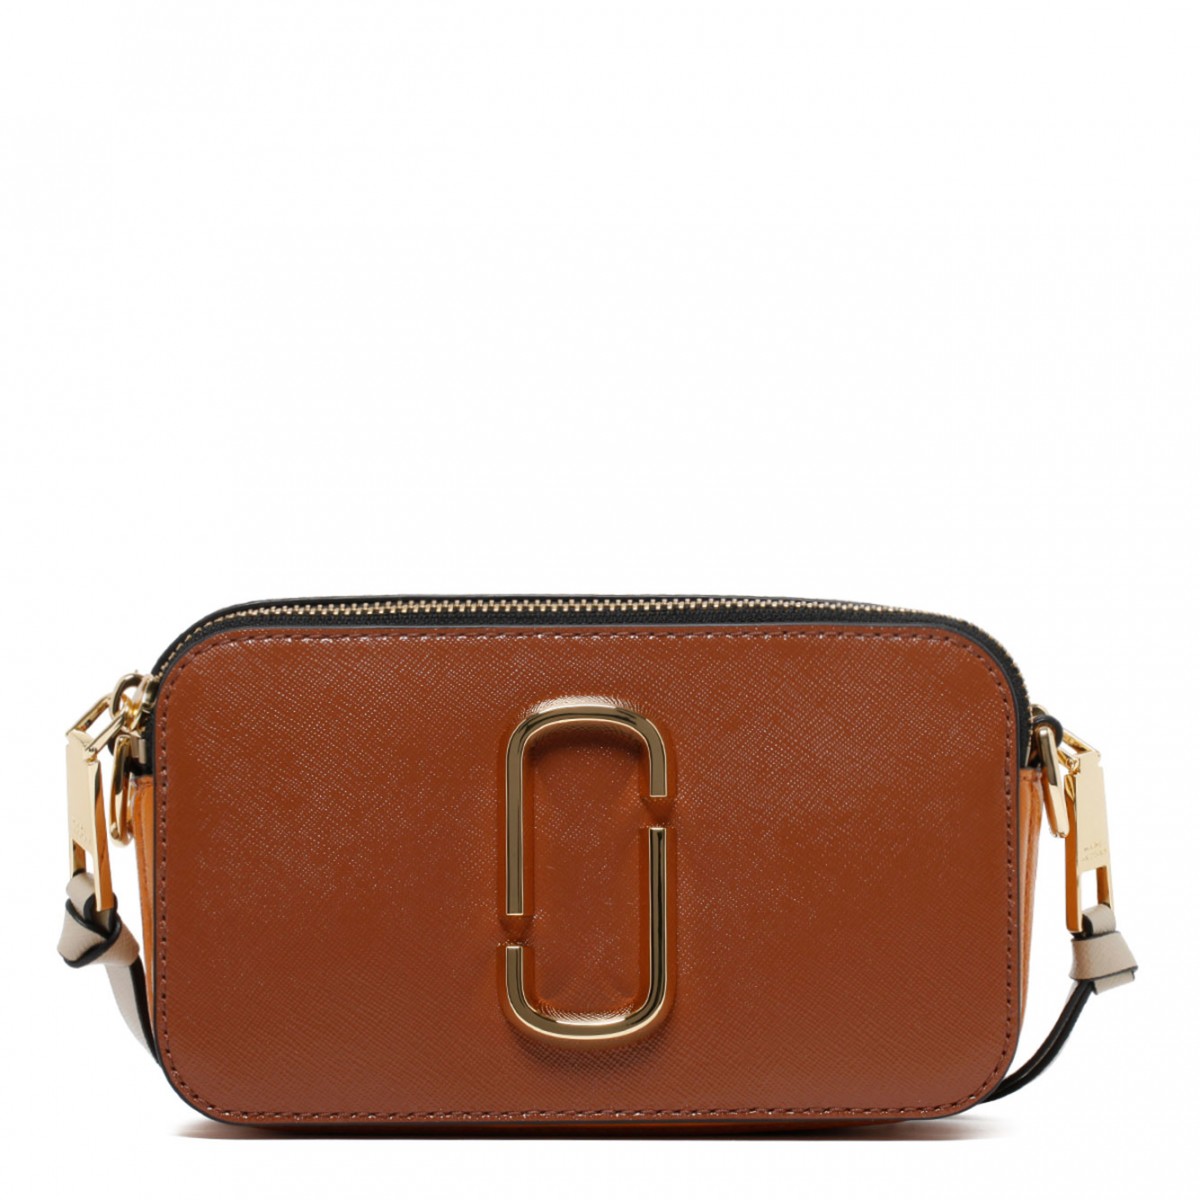 MARC JACOBS: The Snapshot Saffiano leather bag - Brown